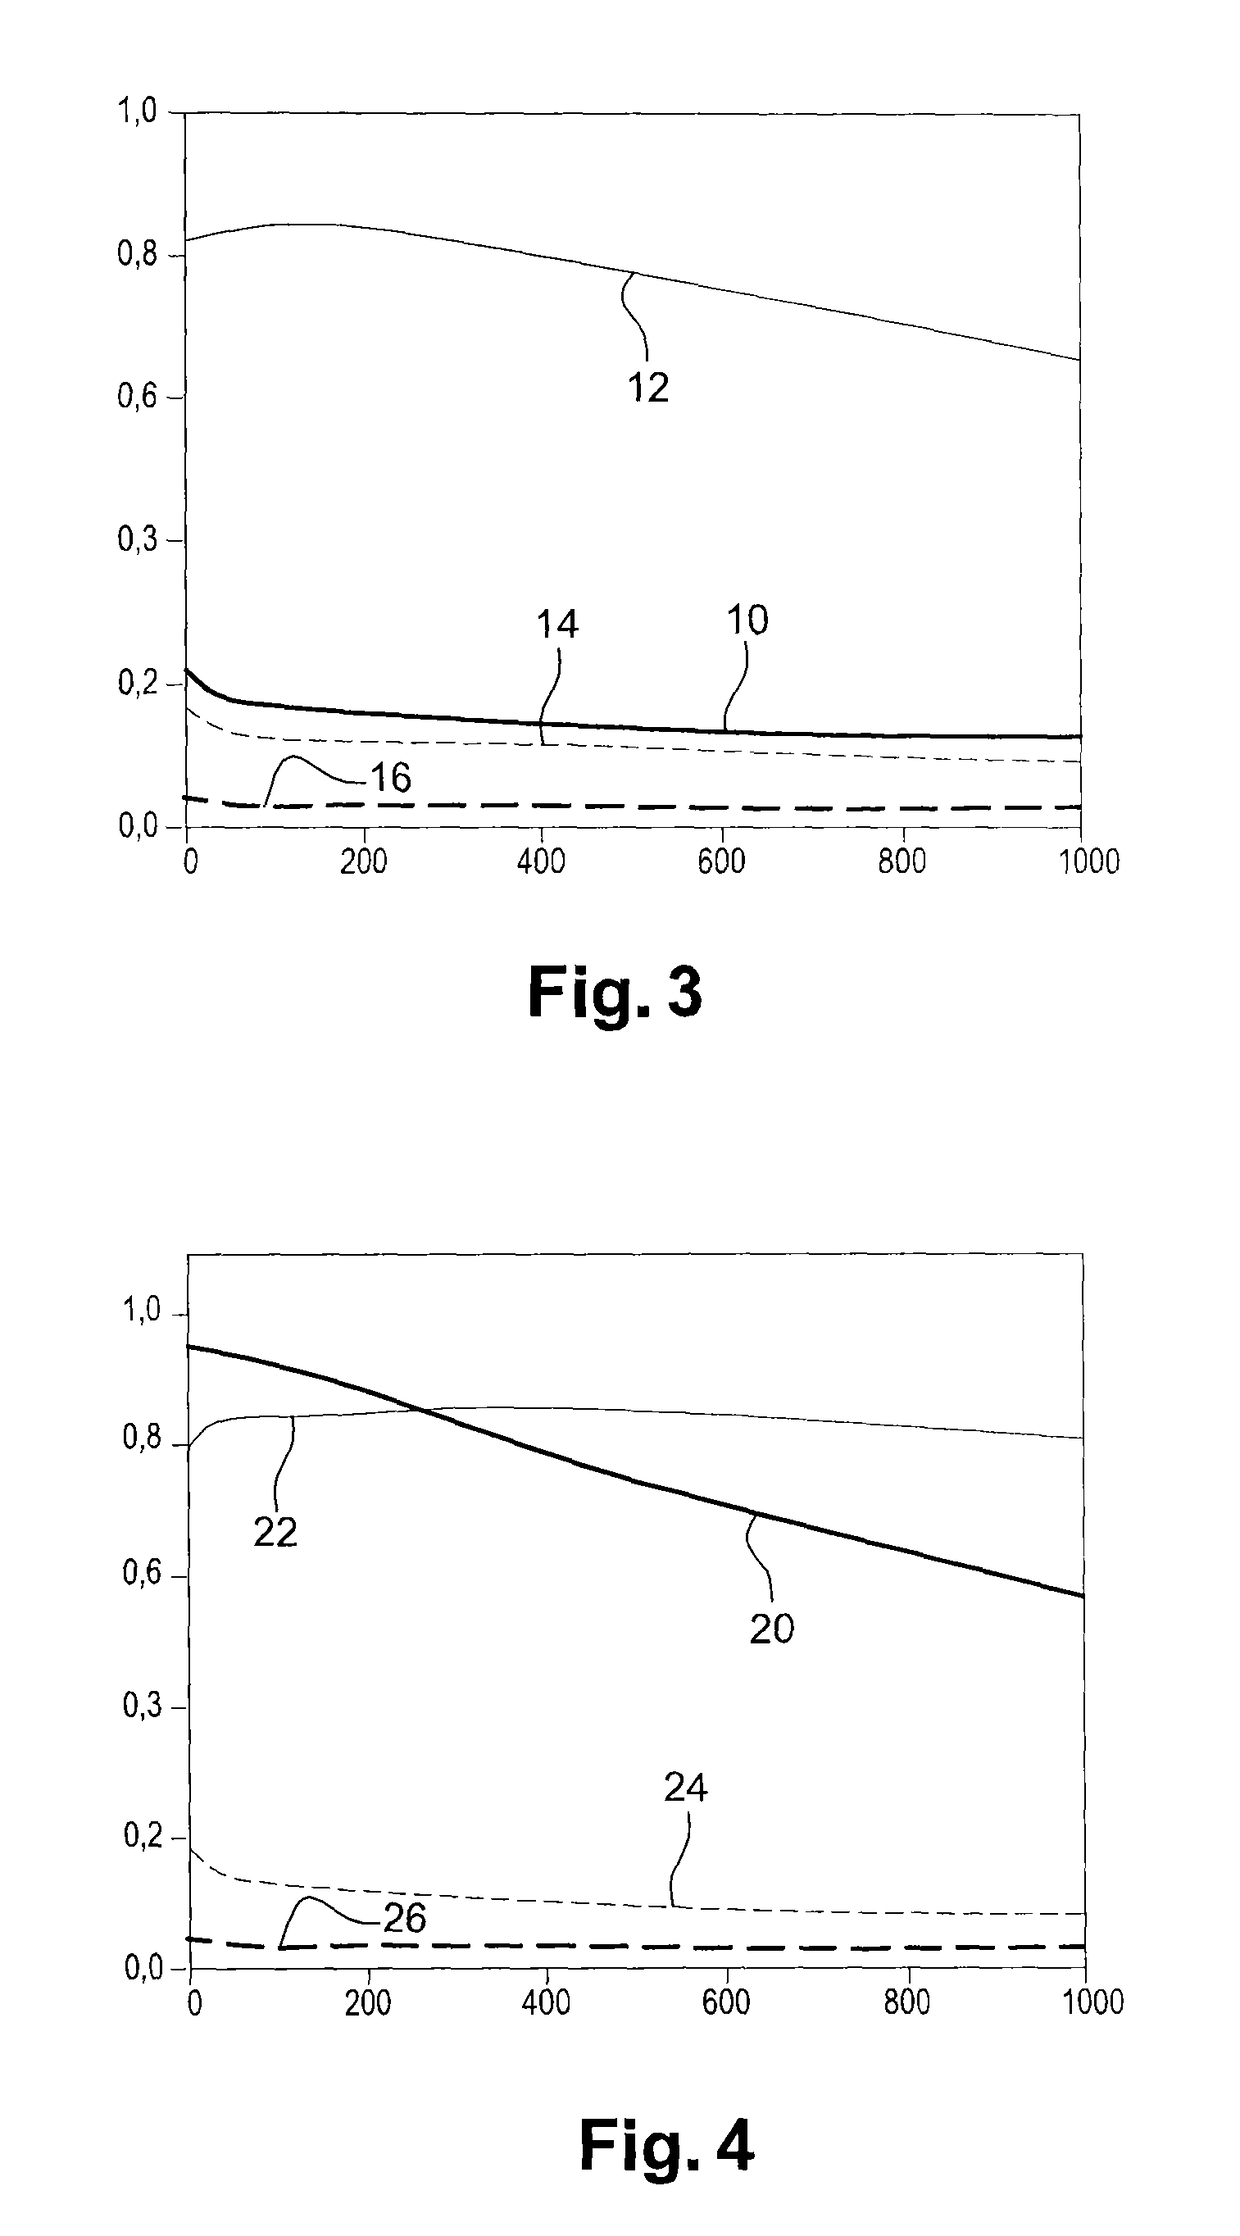 P-N junction optoelectronic device for ionizing dopants by field effect